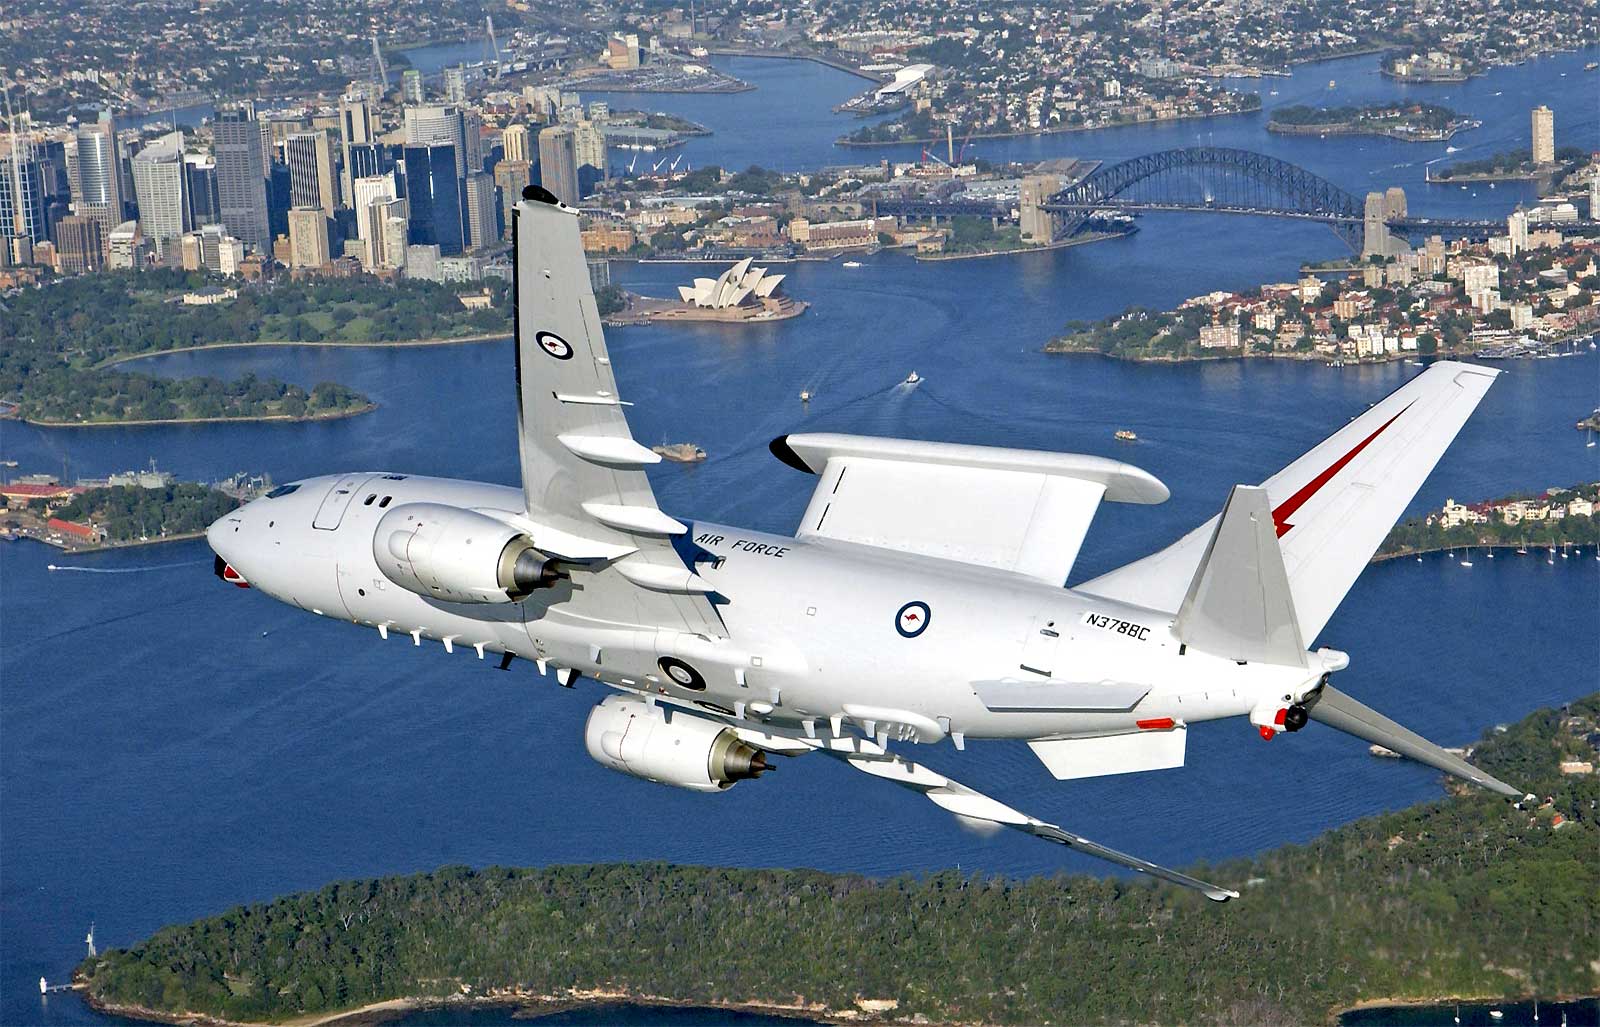 Boeing 737 AEW&C Backgrounds, Compatible - PC, Mobile, Gadgets| 1600x1027 px